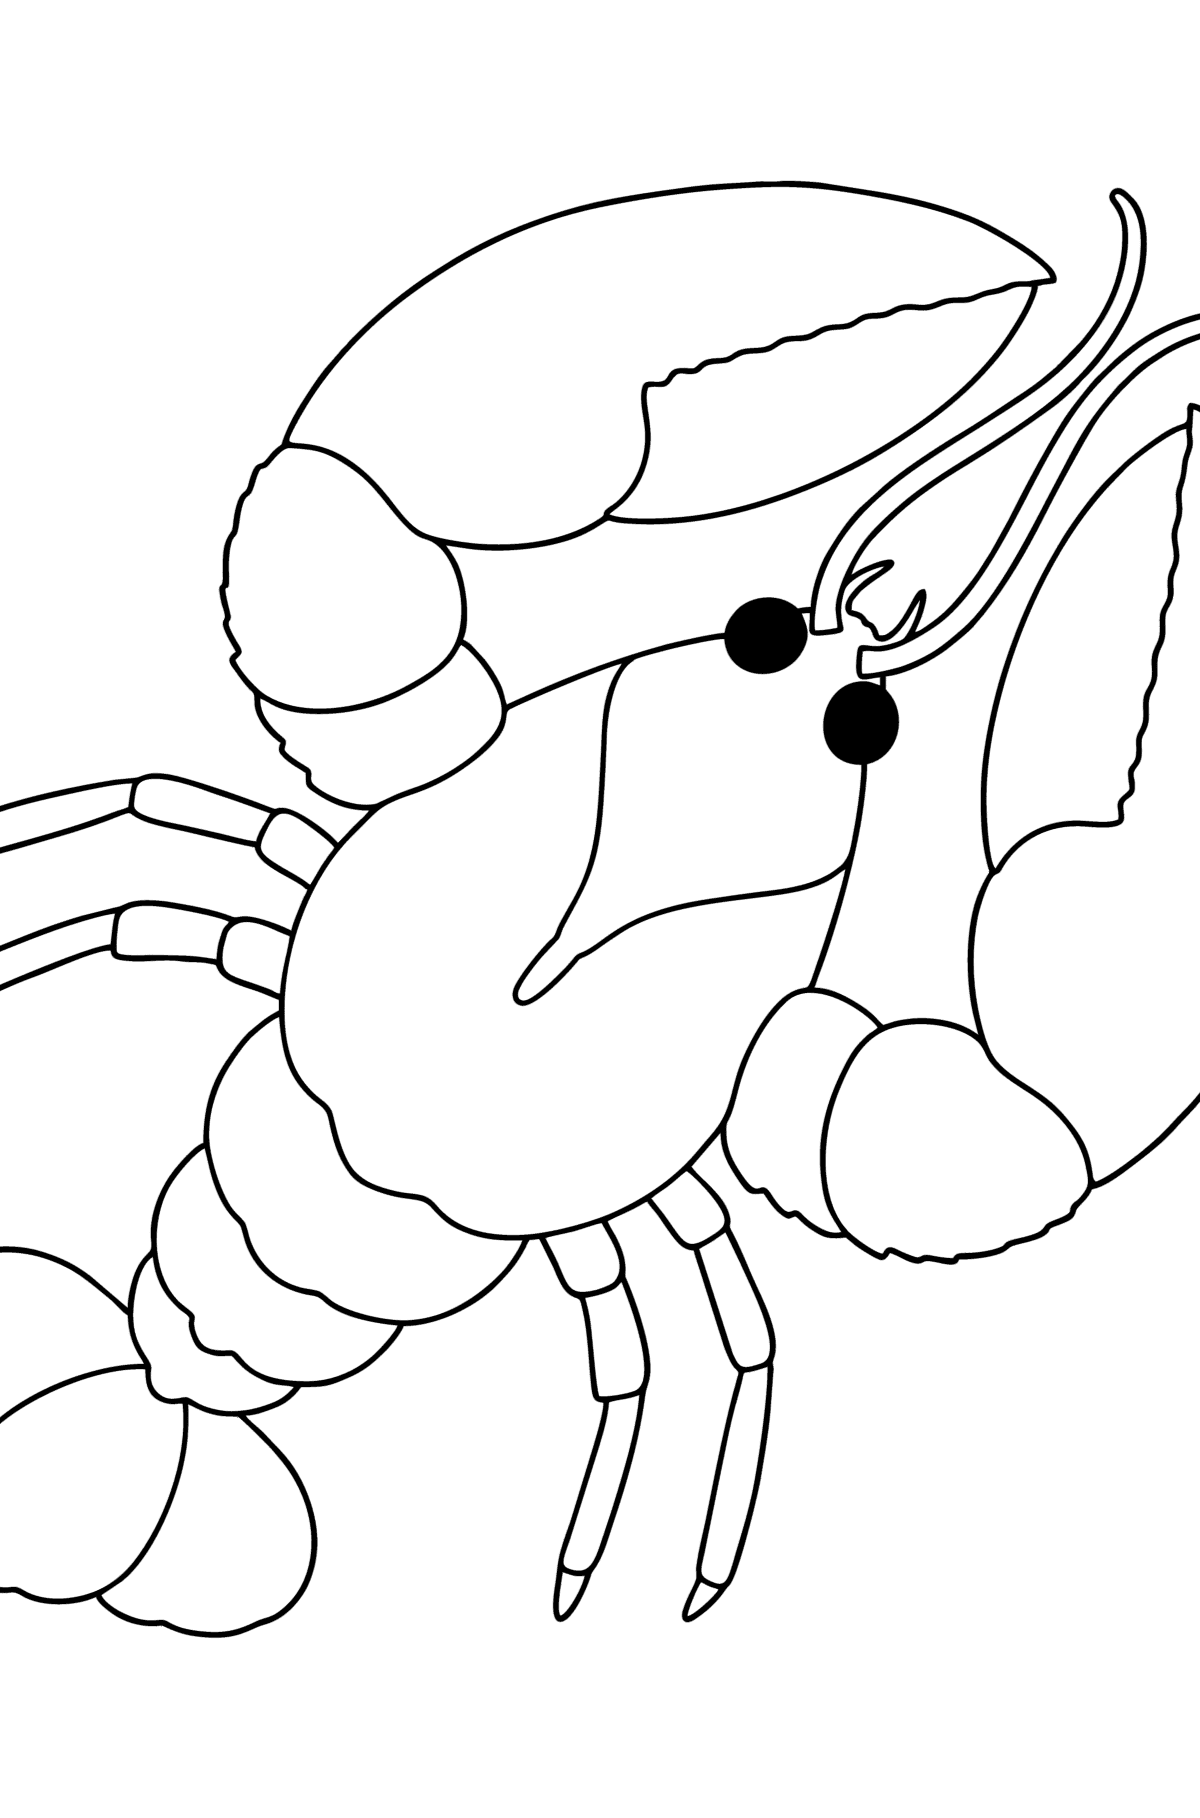 Lobster coloring page - Coloring Pages for Kids